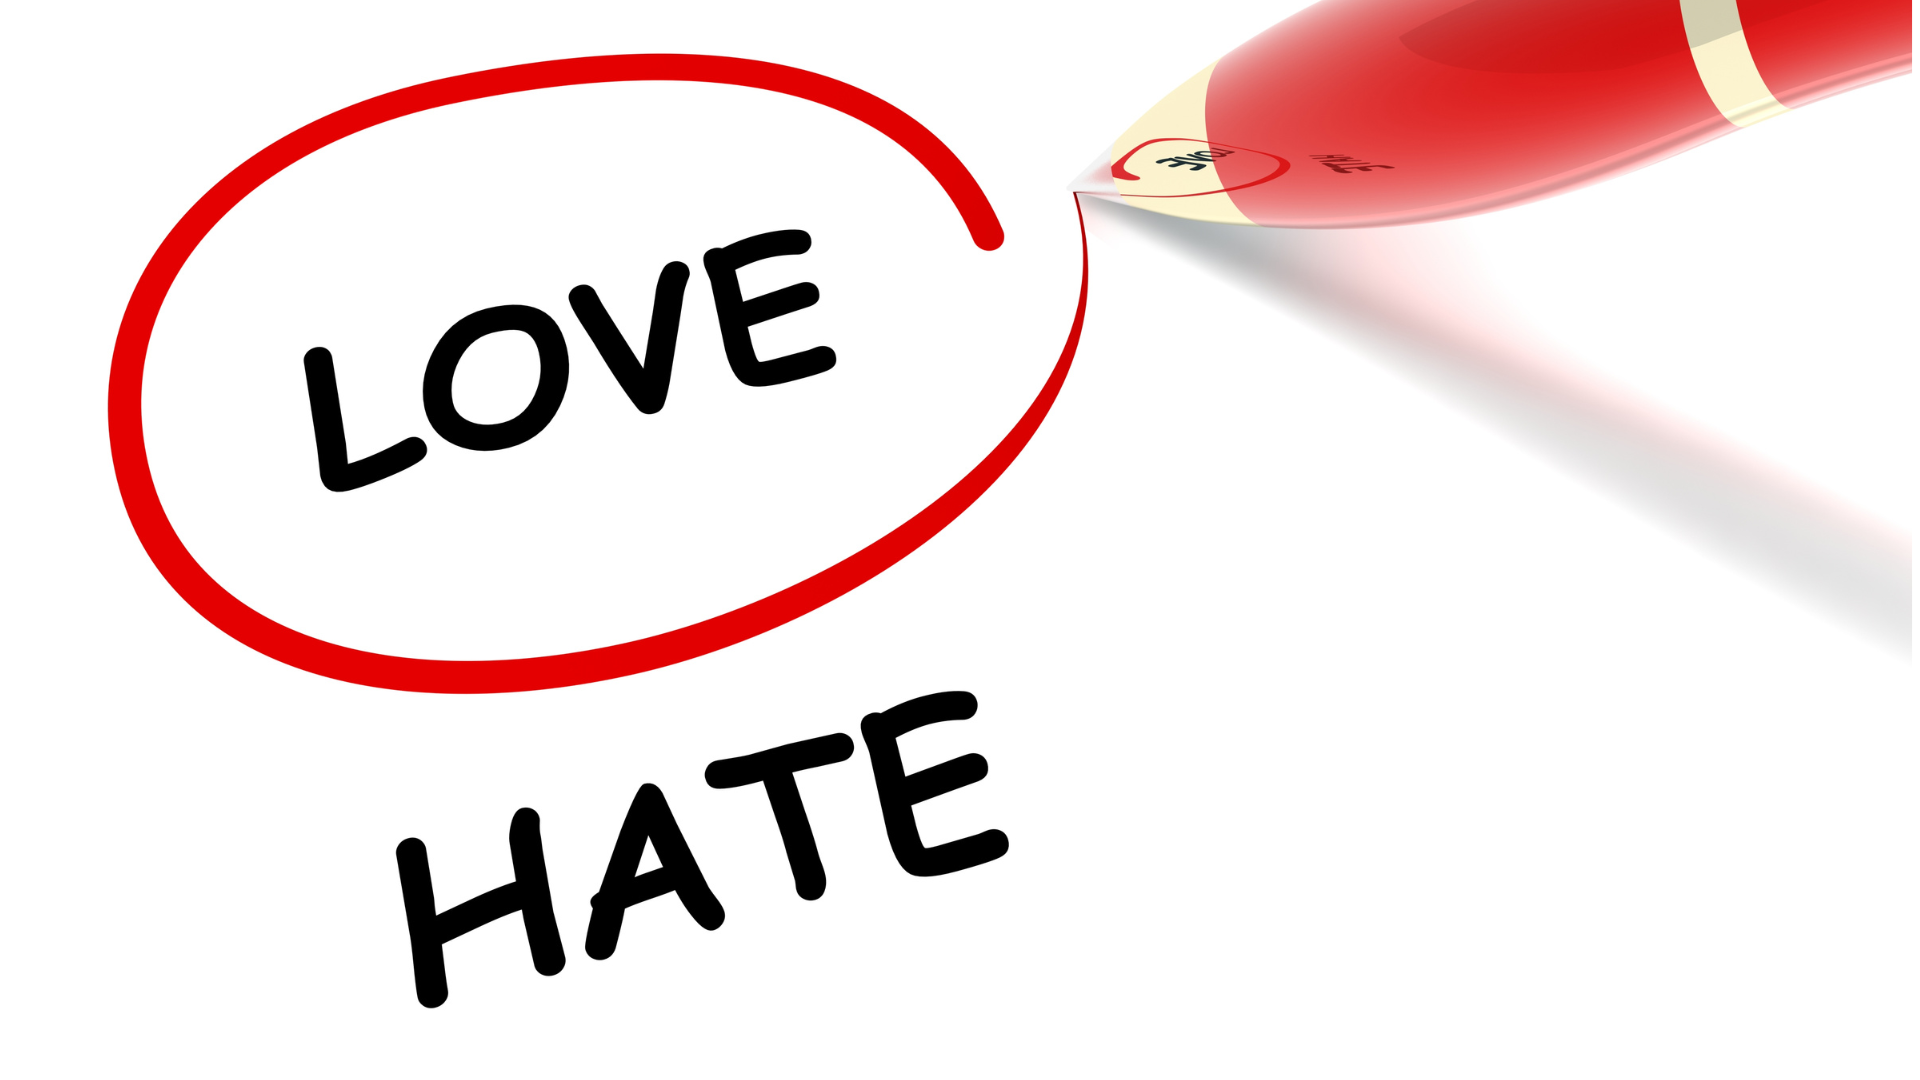 Do You Love Your Church Job (or Hate it?)